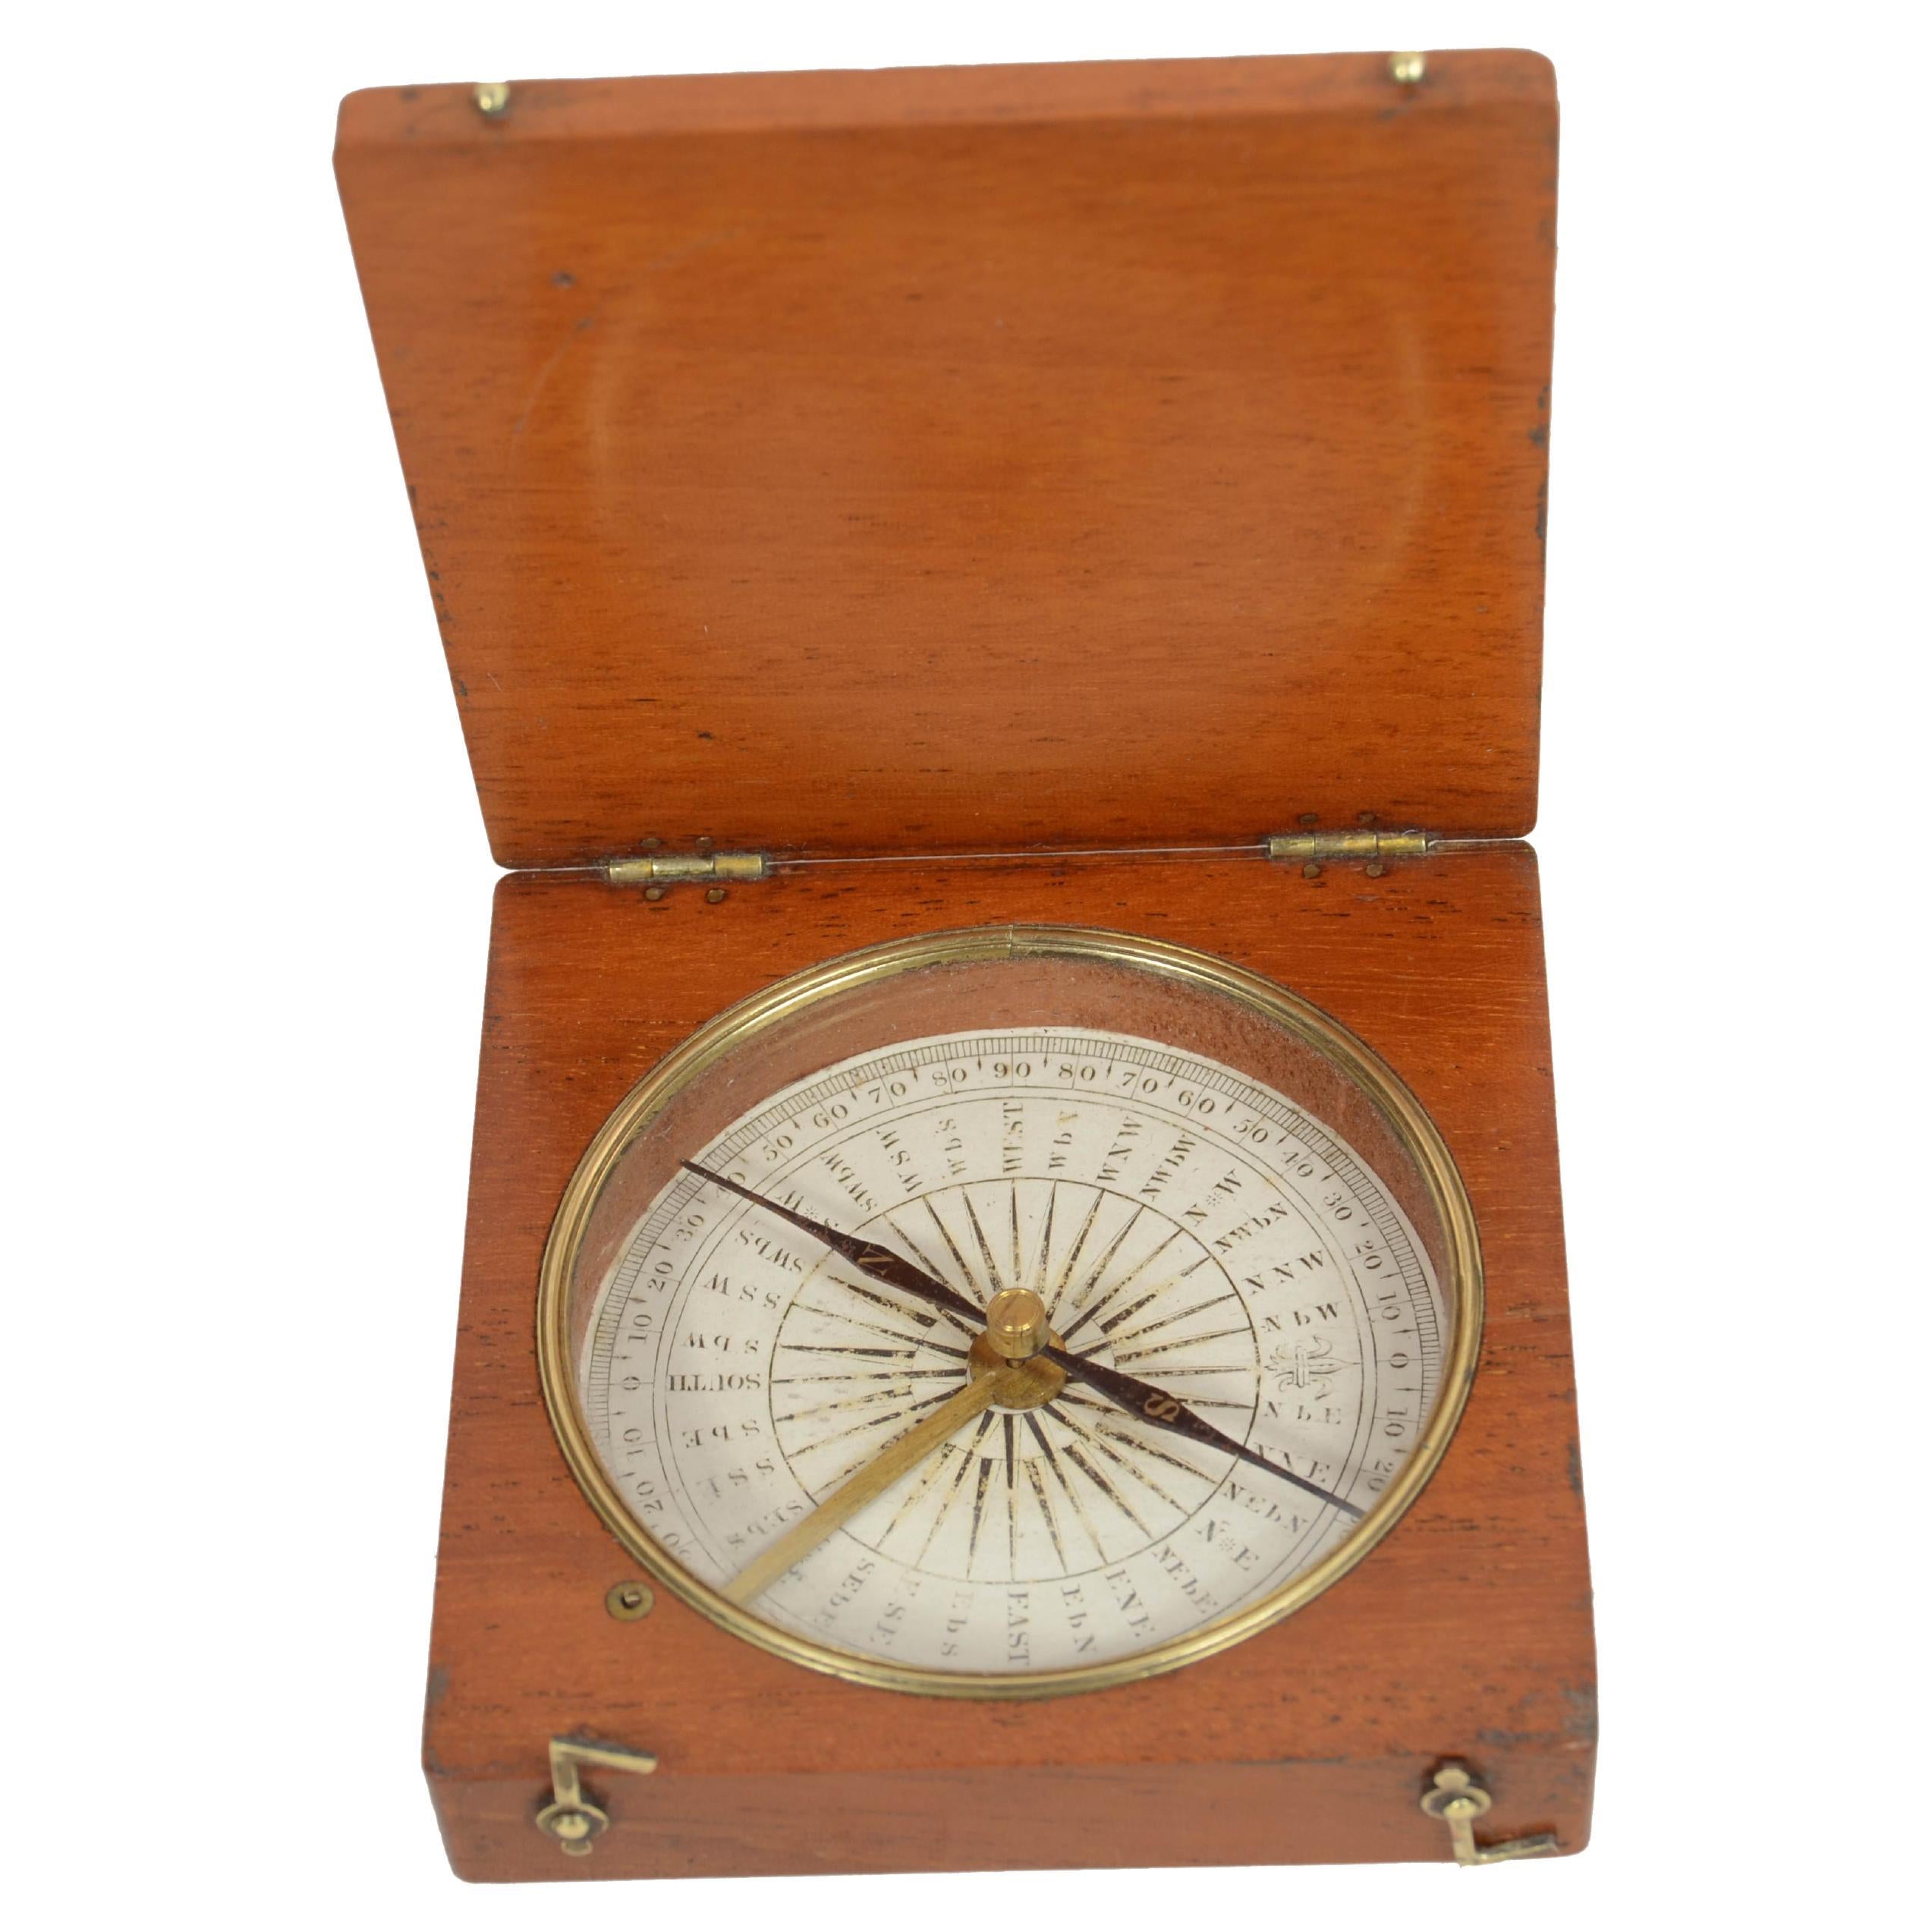 Magnetic travel surveyor's compass made of oak wood and brass mid-19th century